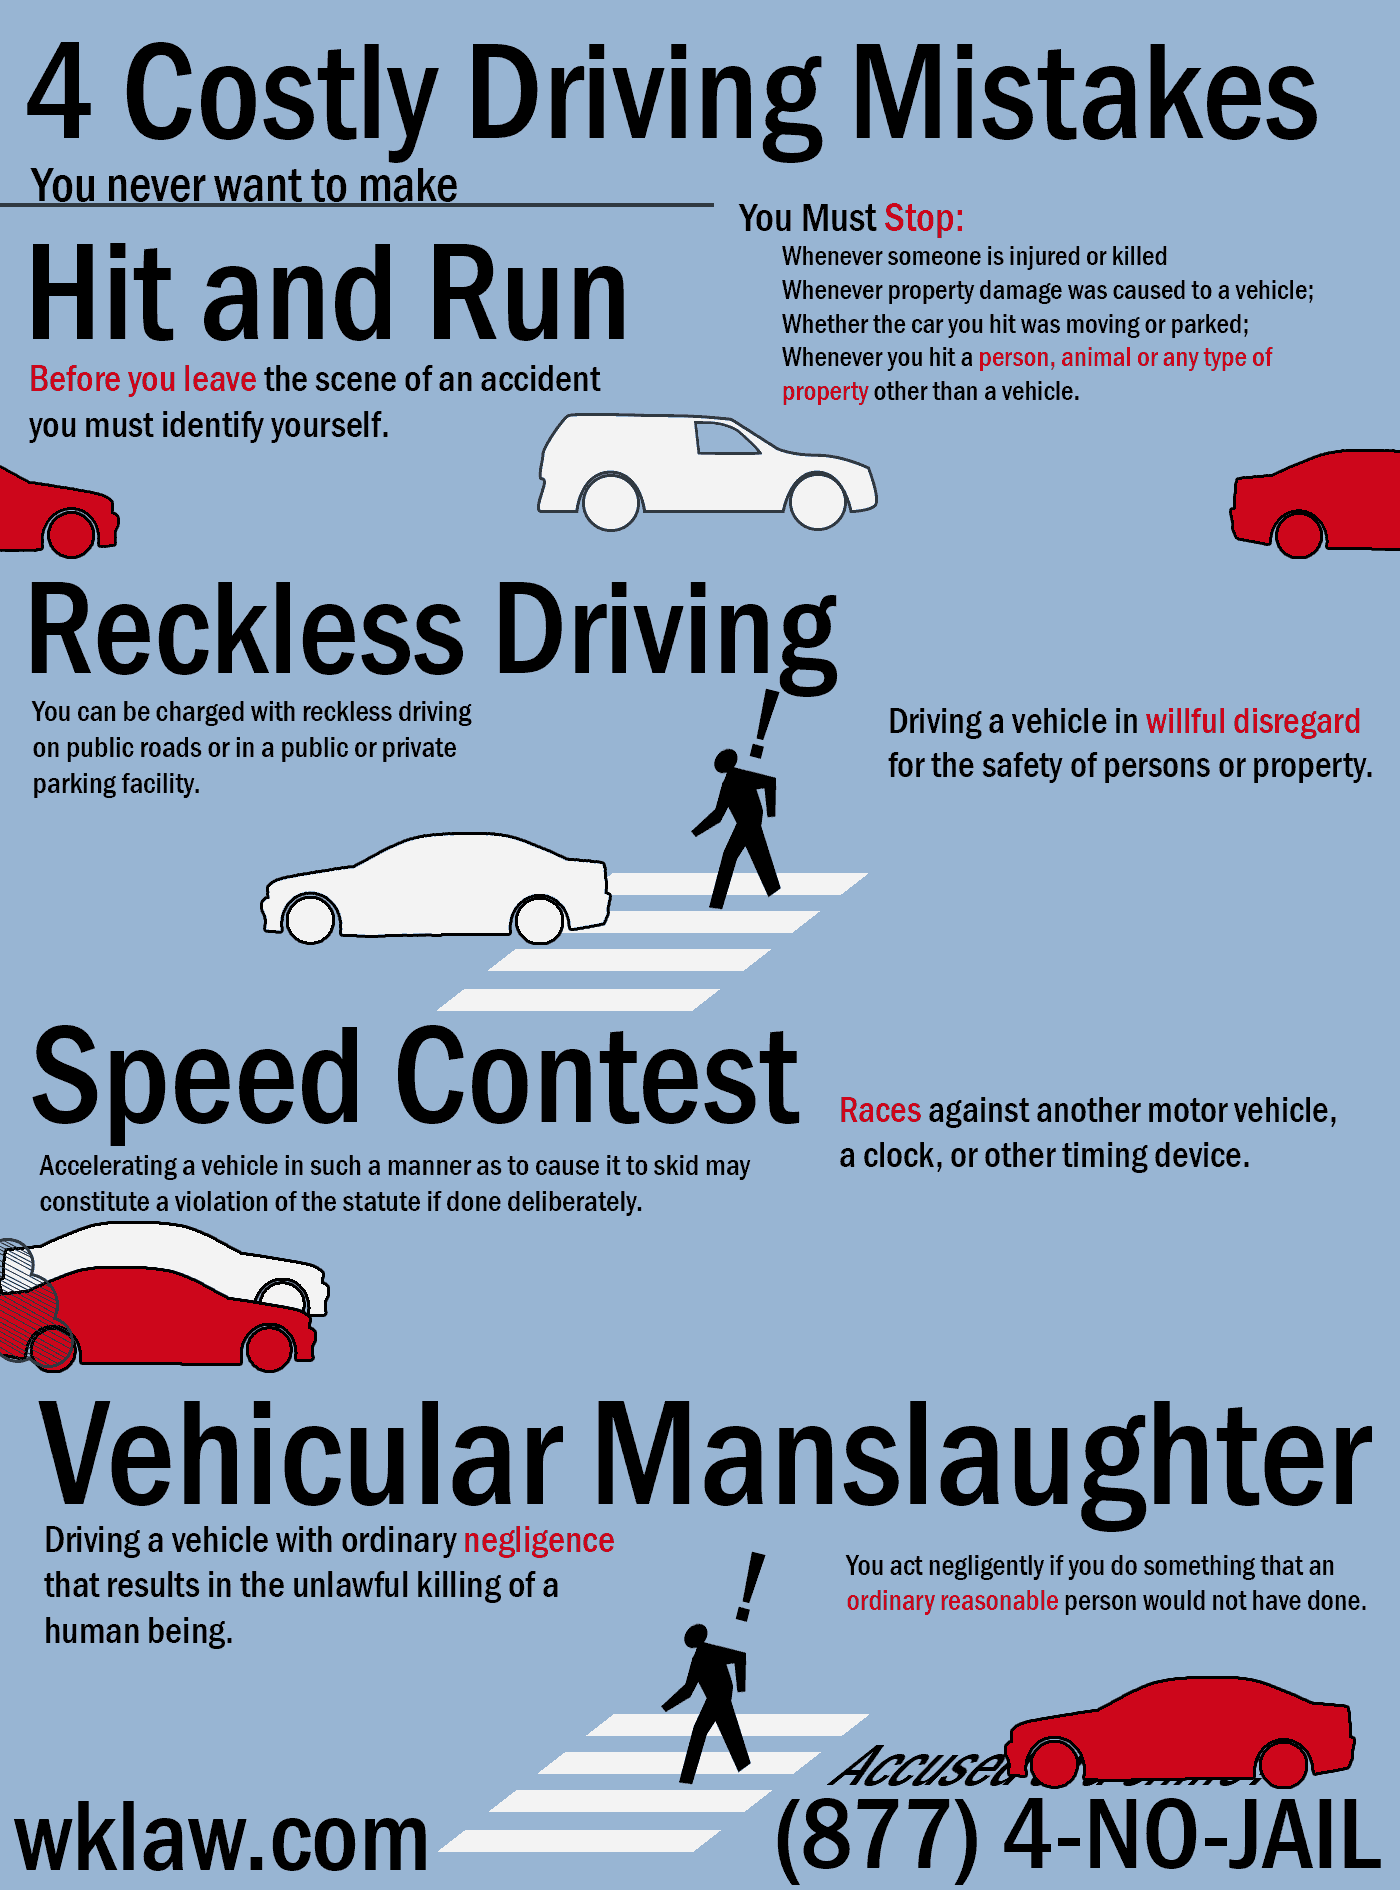 4 costly driving mistakes you never want to make infographic visit medium